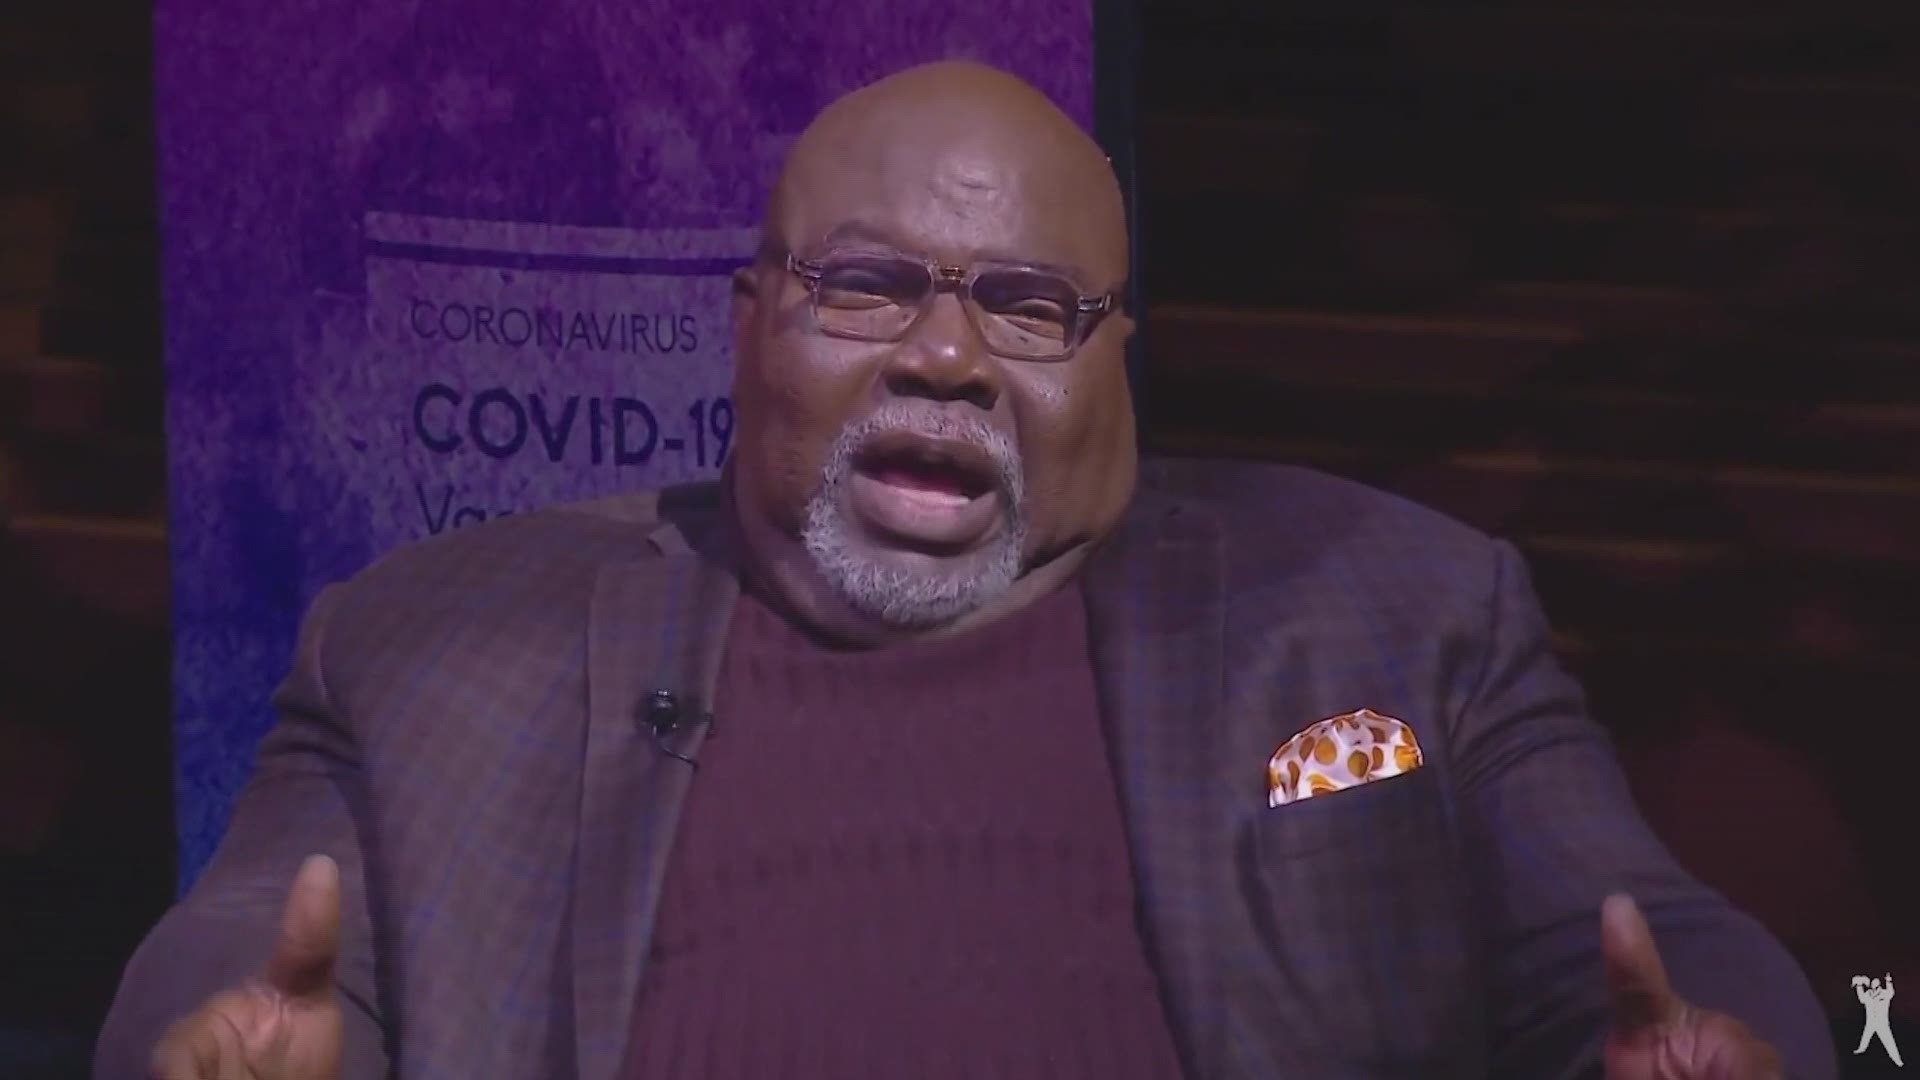 Bishop Jakes, Dr. Fauci and other health care experts on the front lines of the pandemic answer some common questions about the virus and the vaccine.